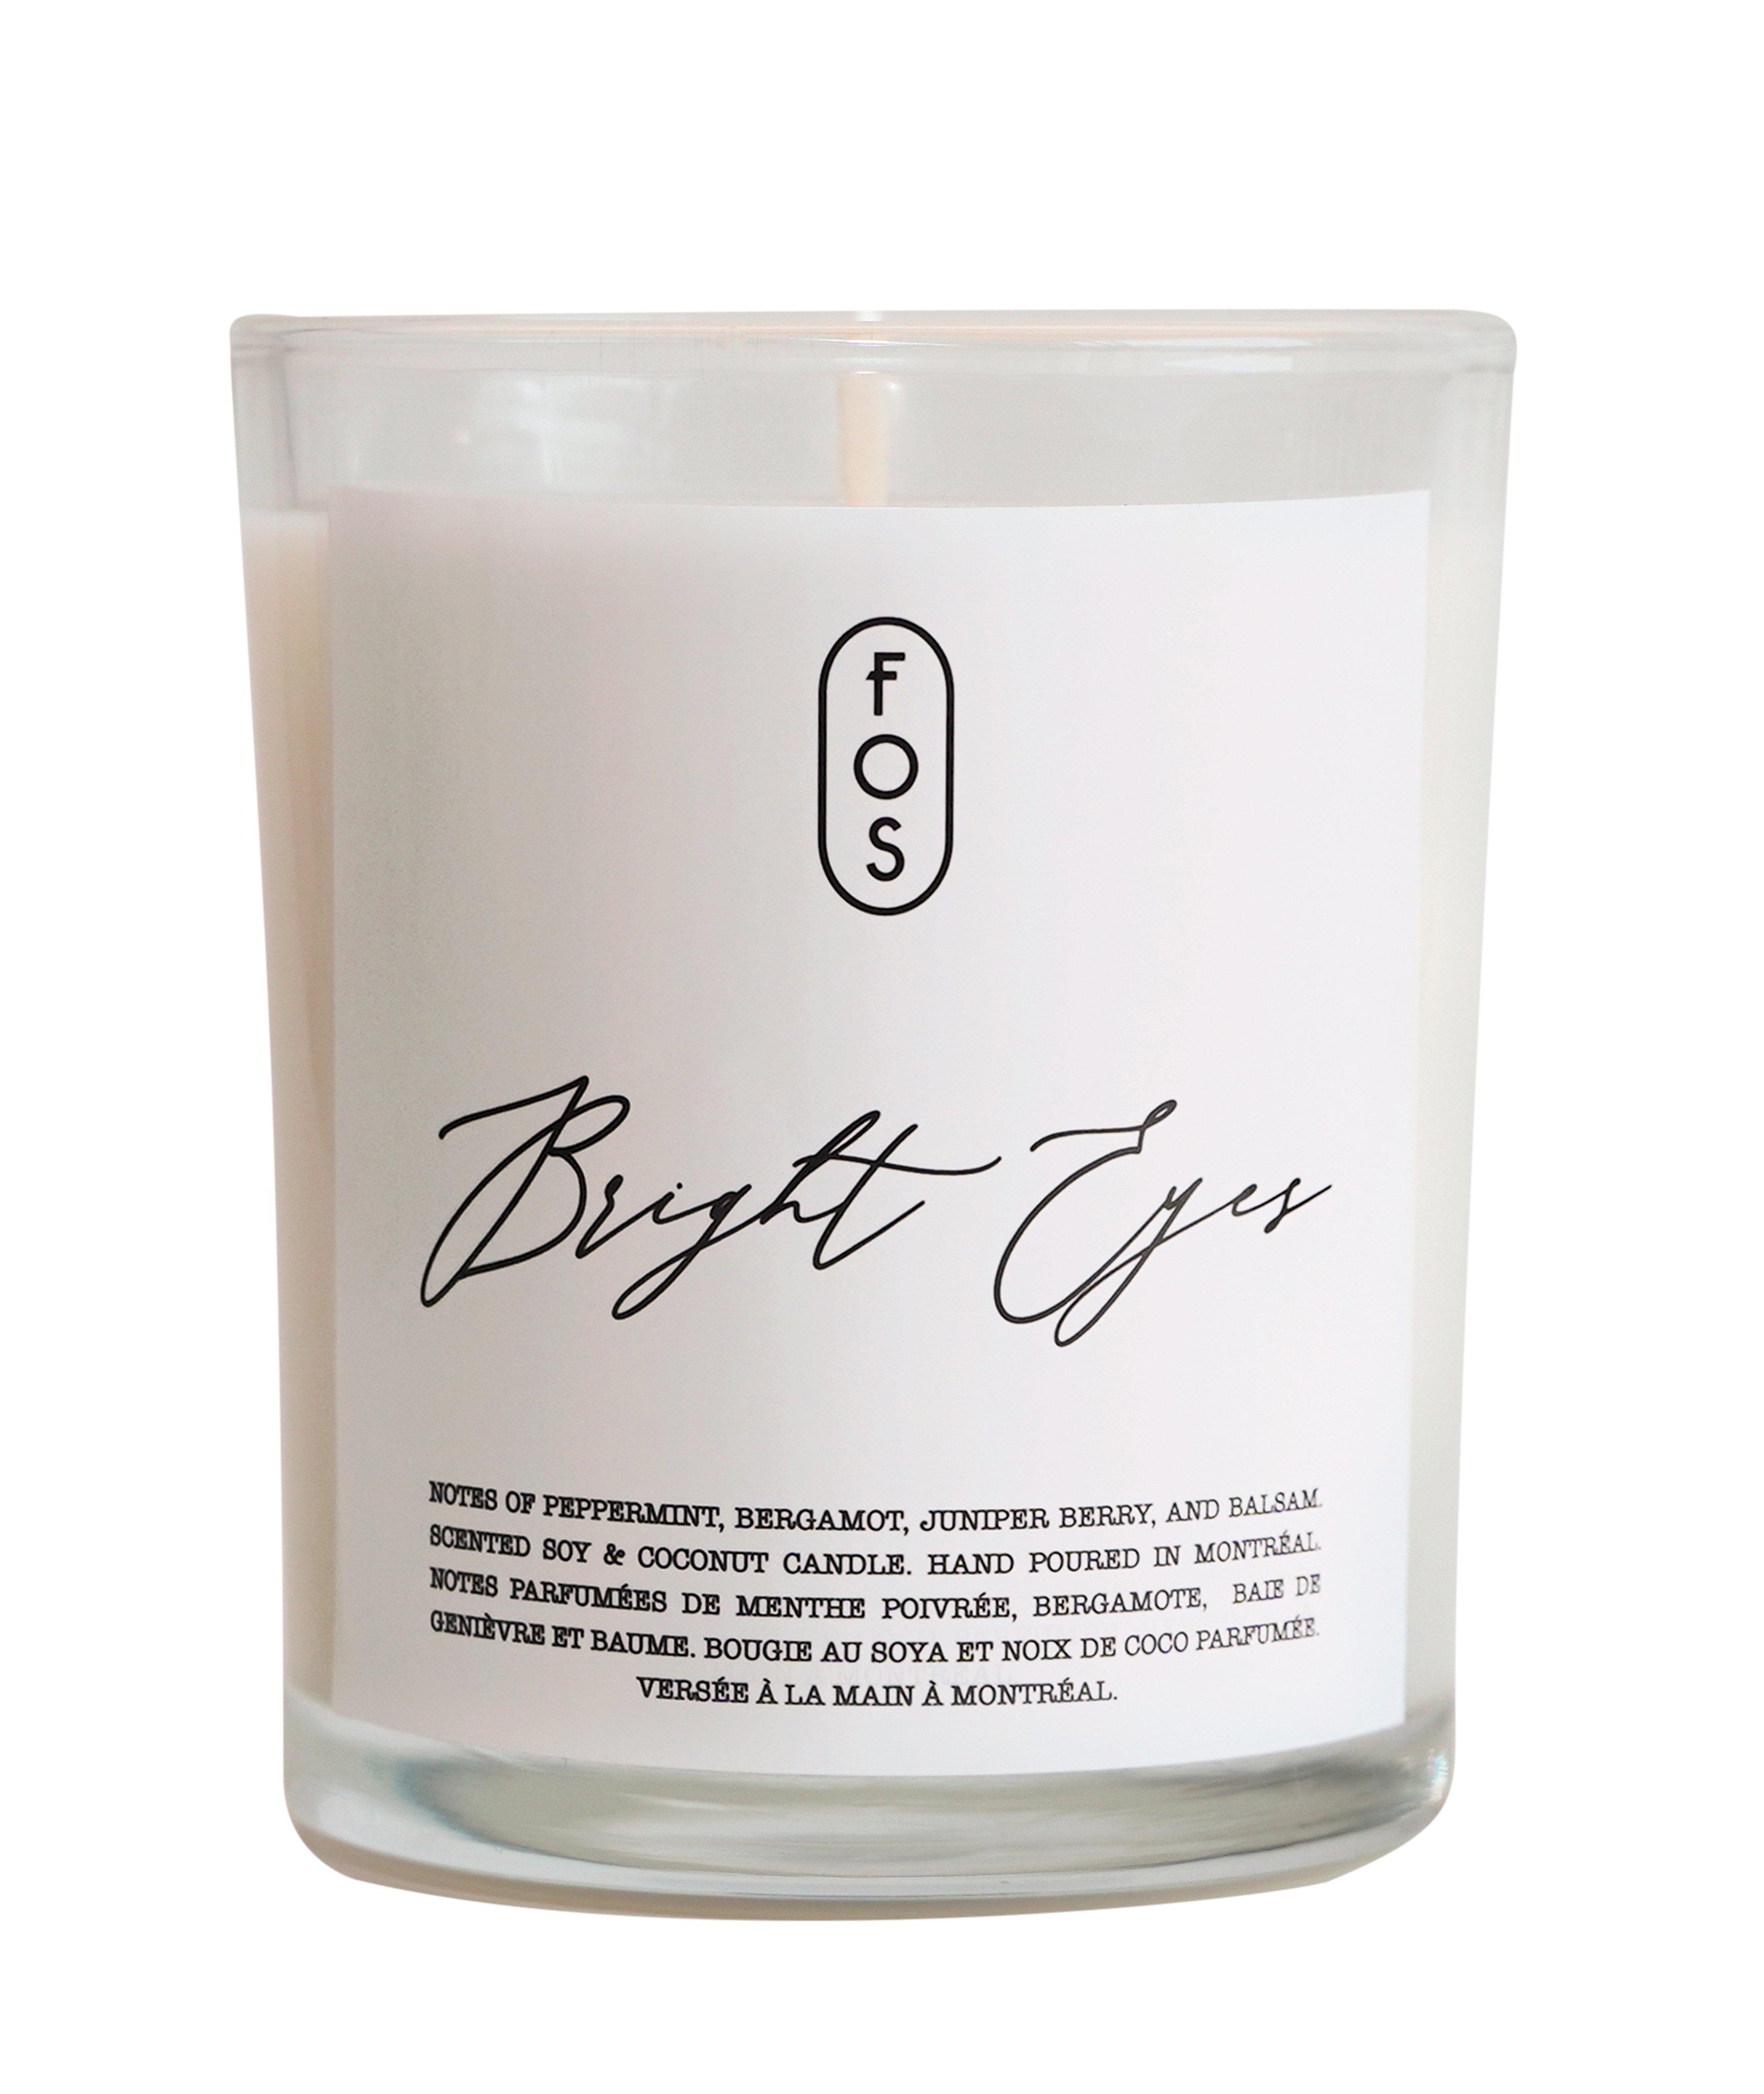 Bright Eyes Essential Oils Candle image 0